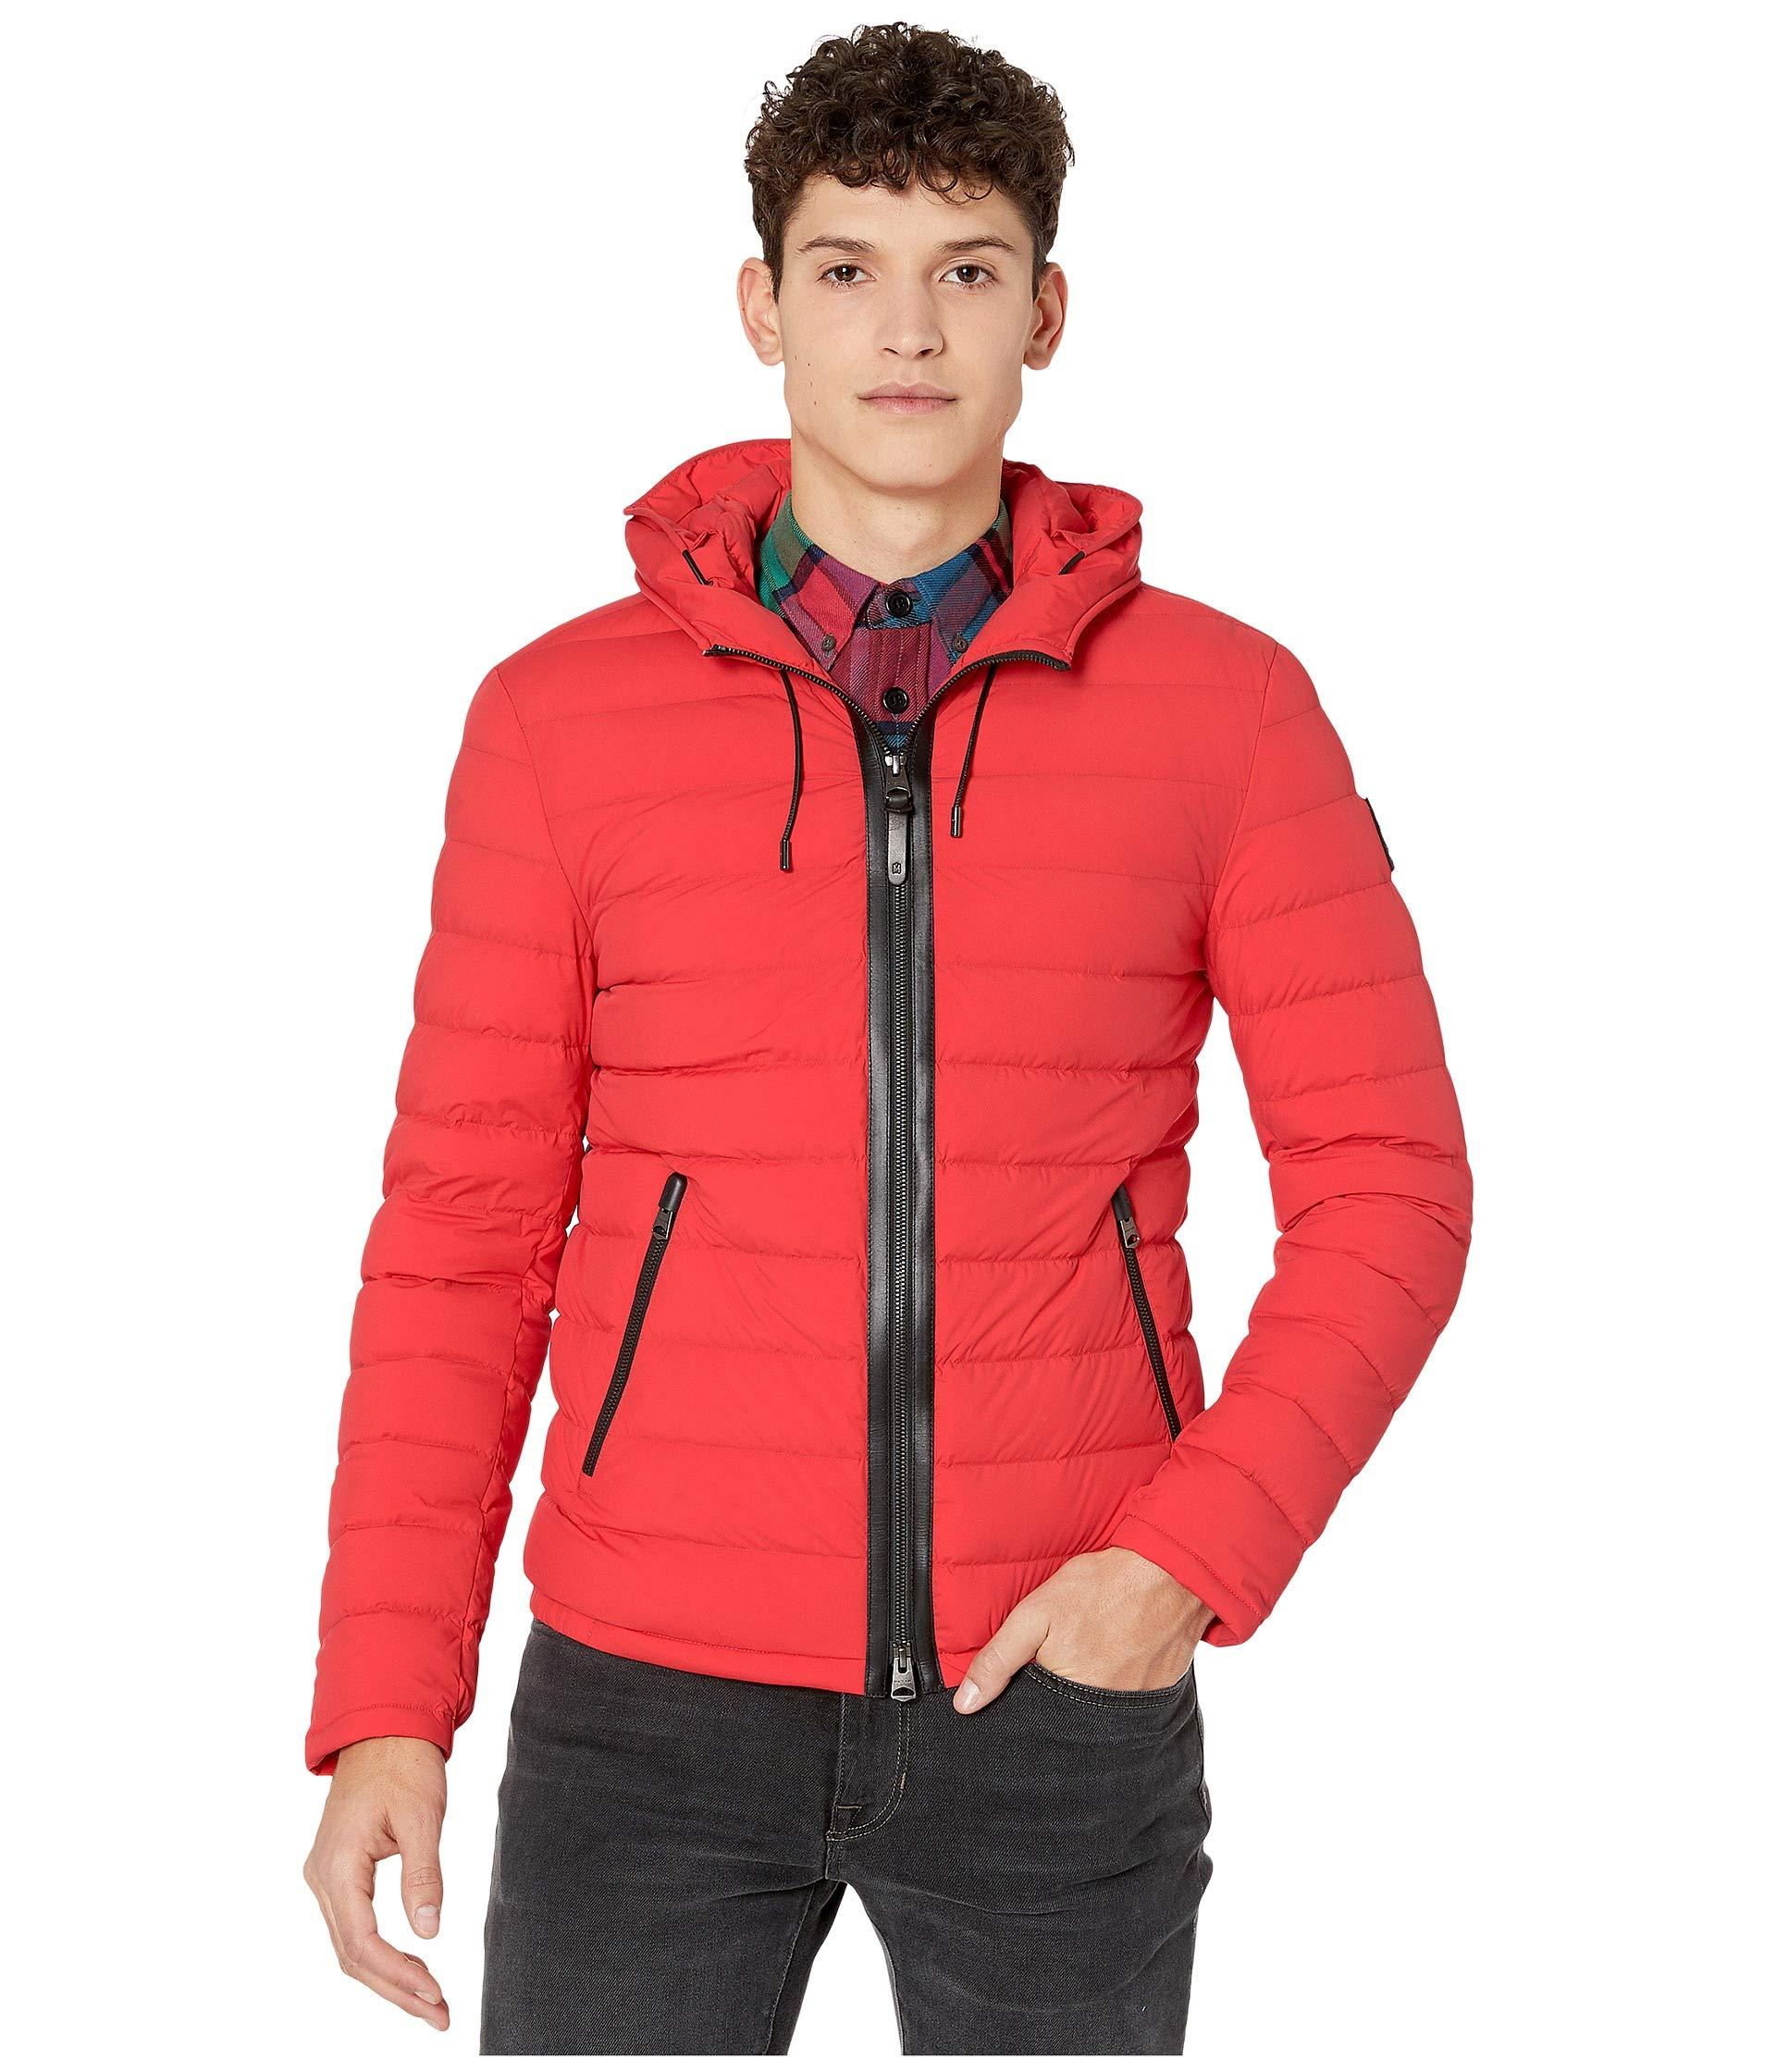 Mackage Leather Mike Stretch Puffer in Red for Men - Lyst